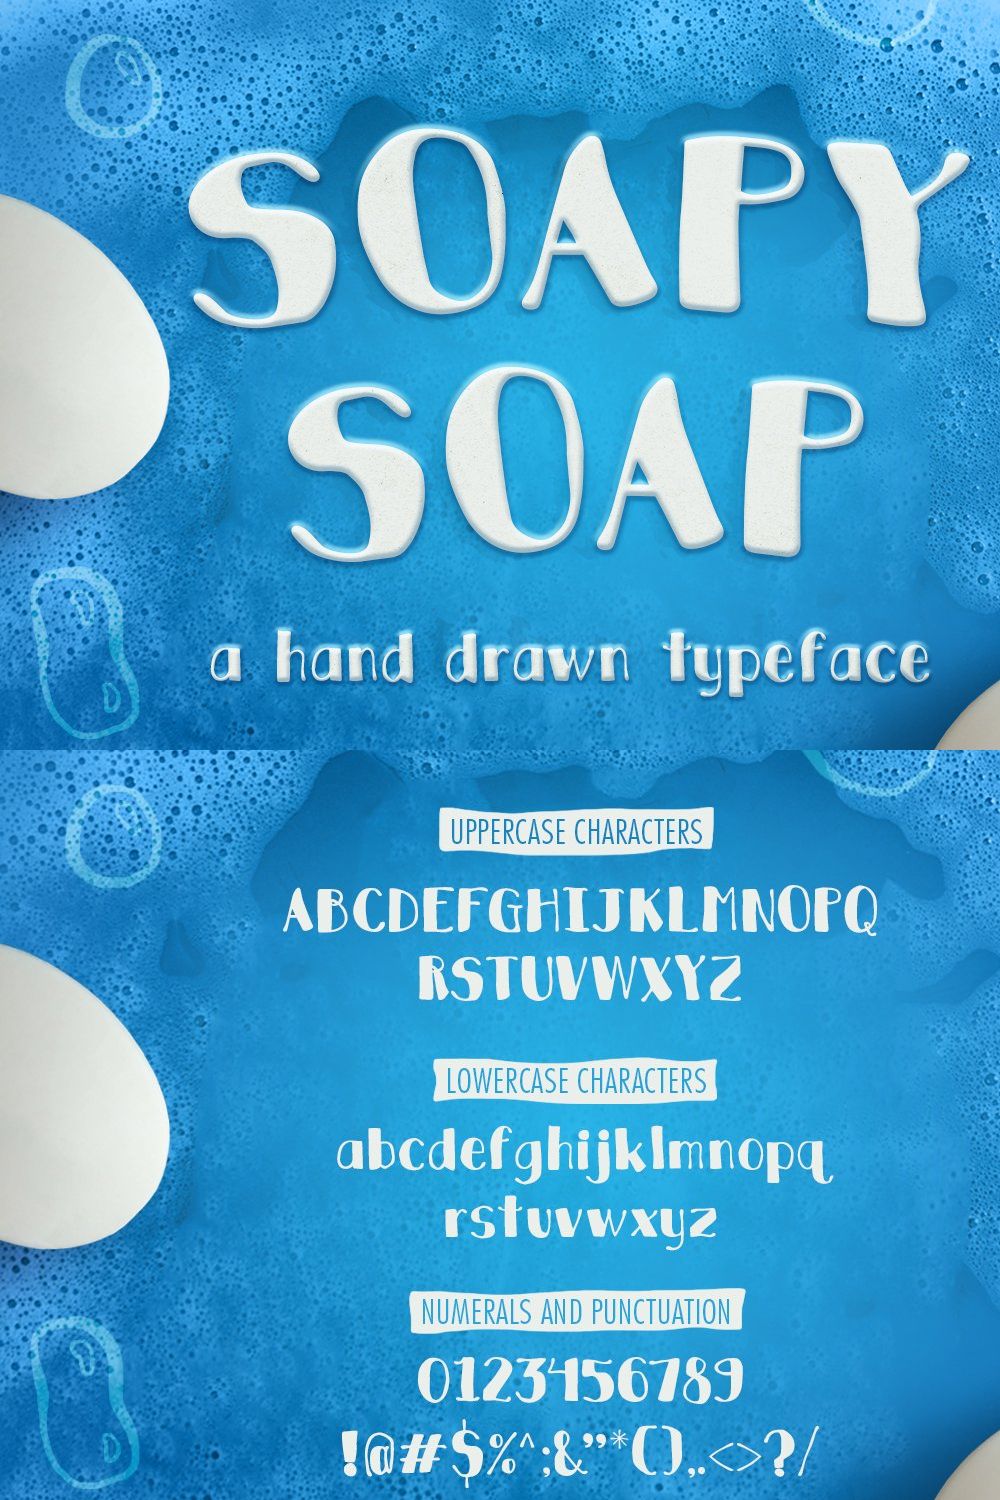 Soapy Soap Typeface pinterest preview image.